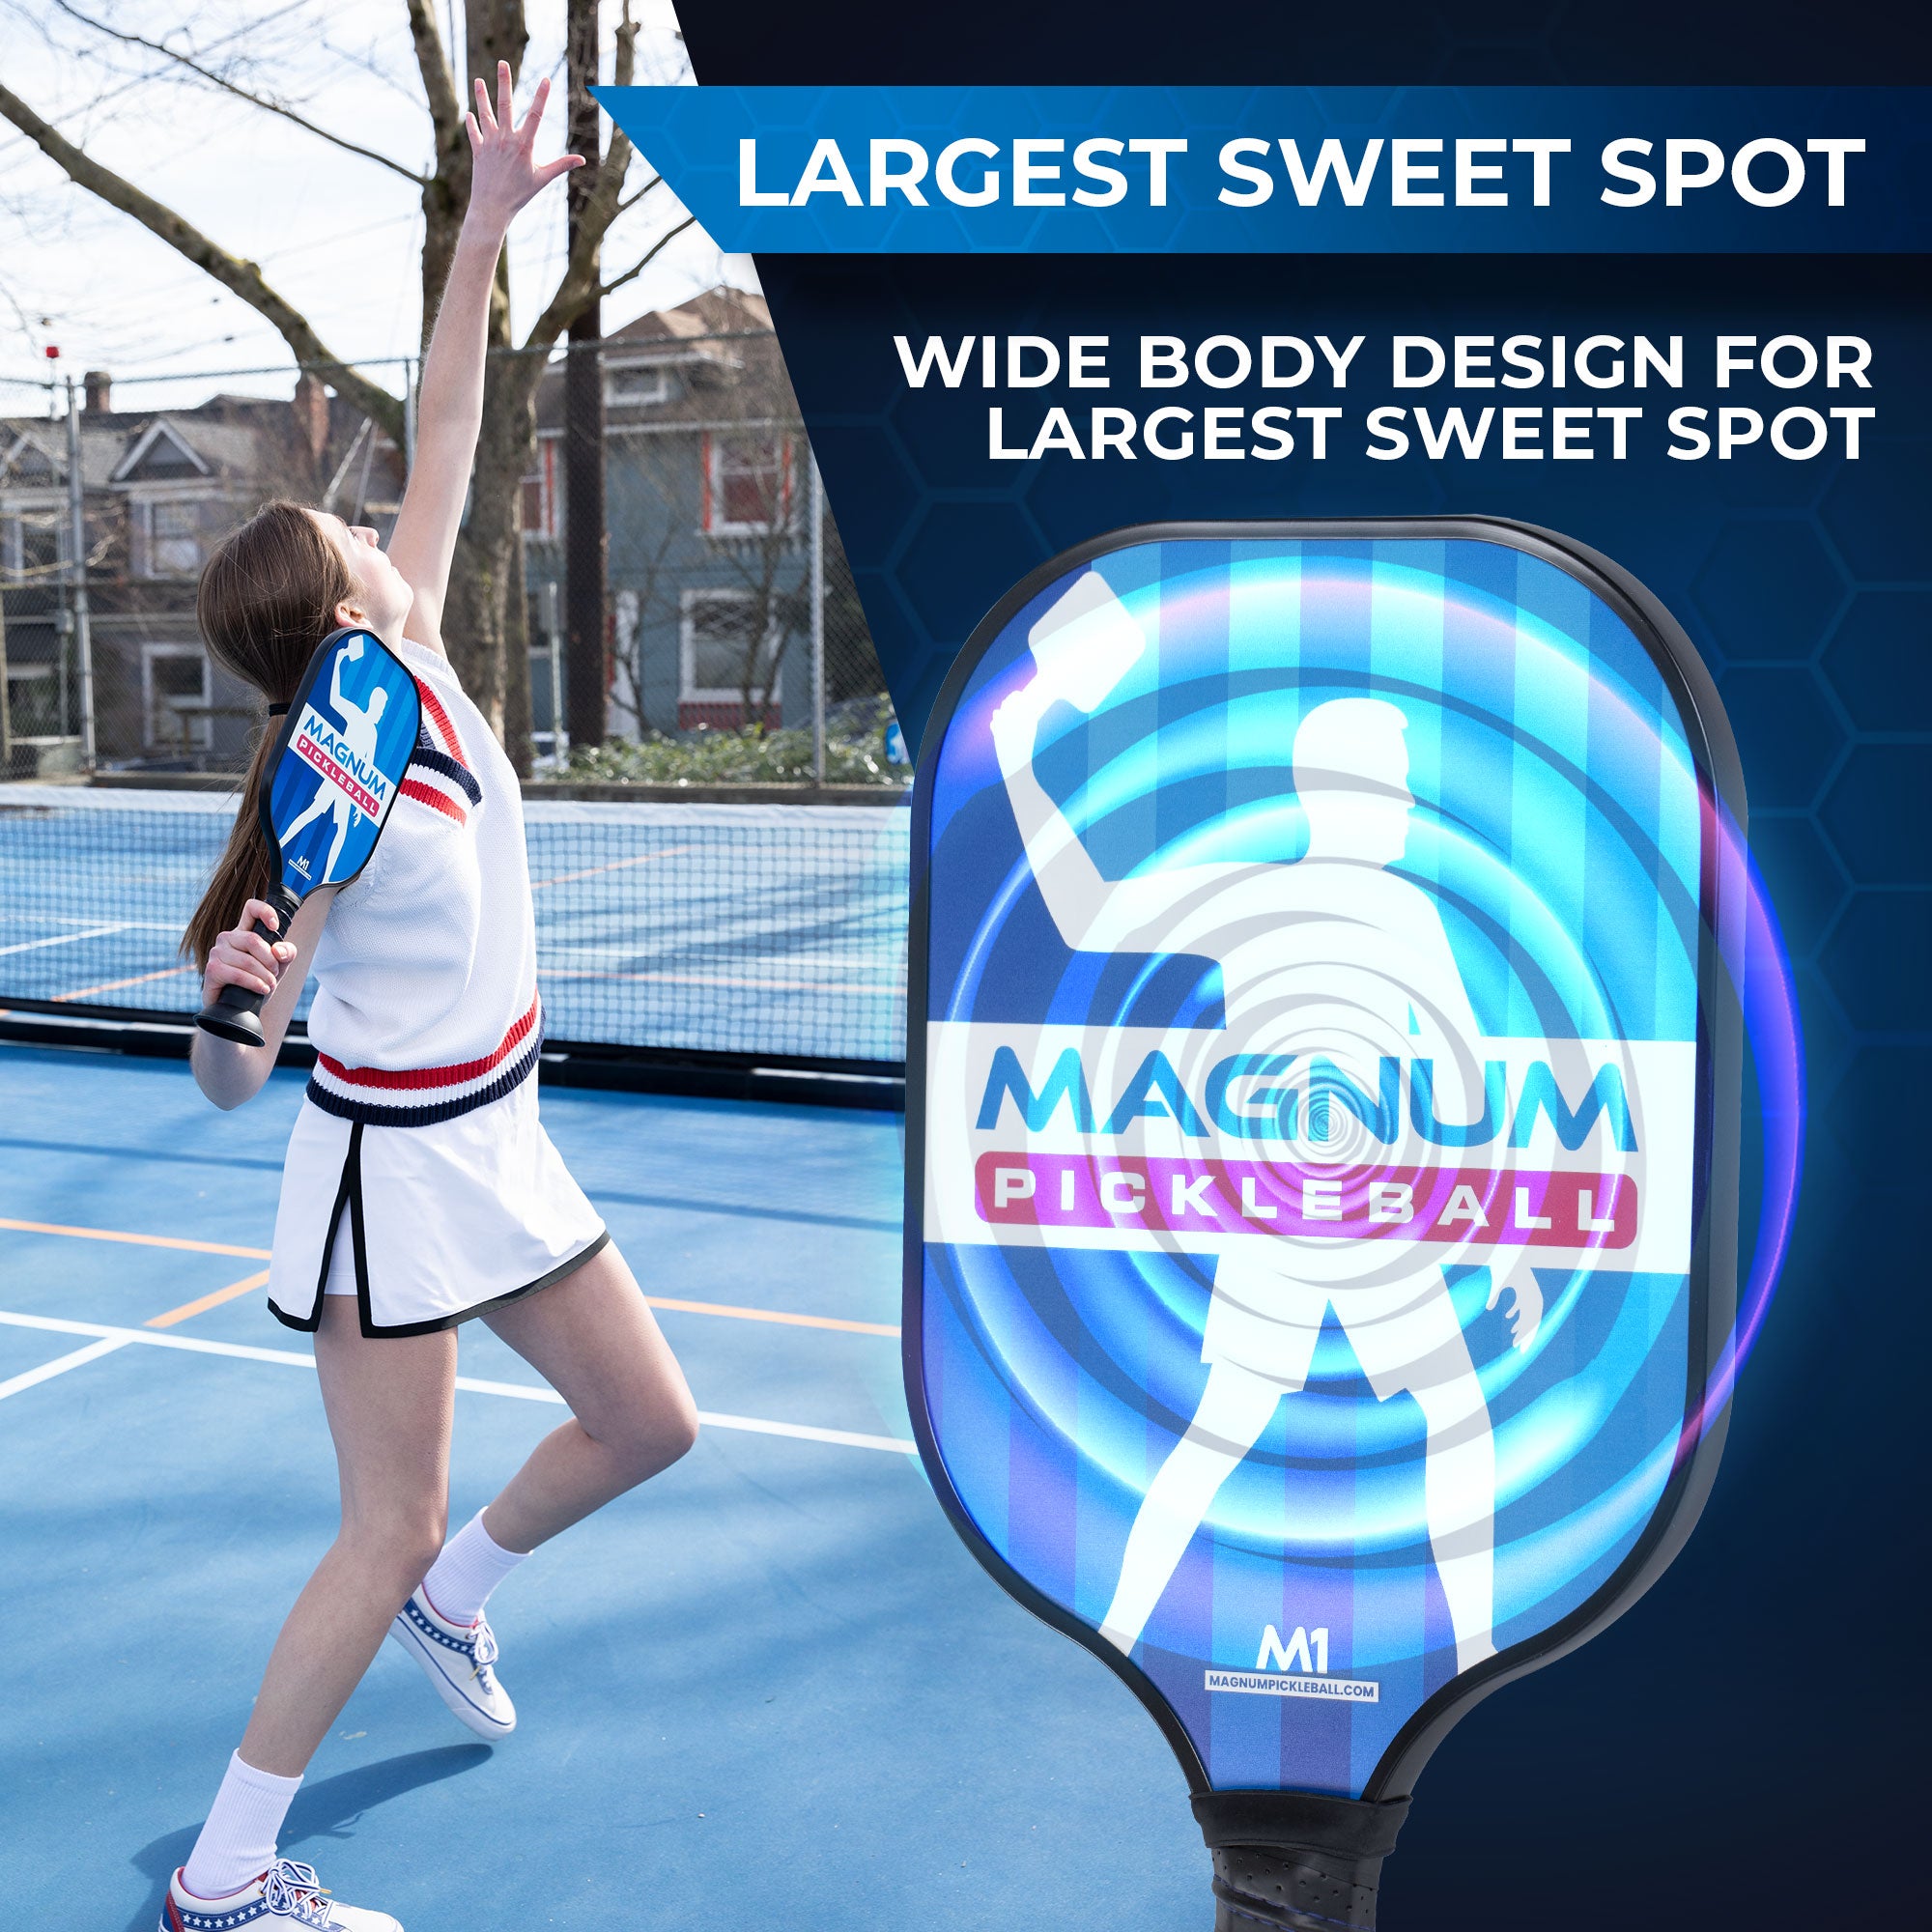 Magnum Pickleball Paddles are designed to have the Largest Sweetspot